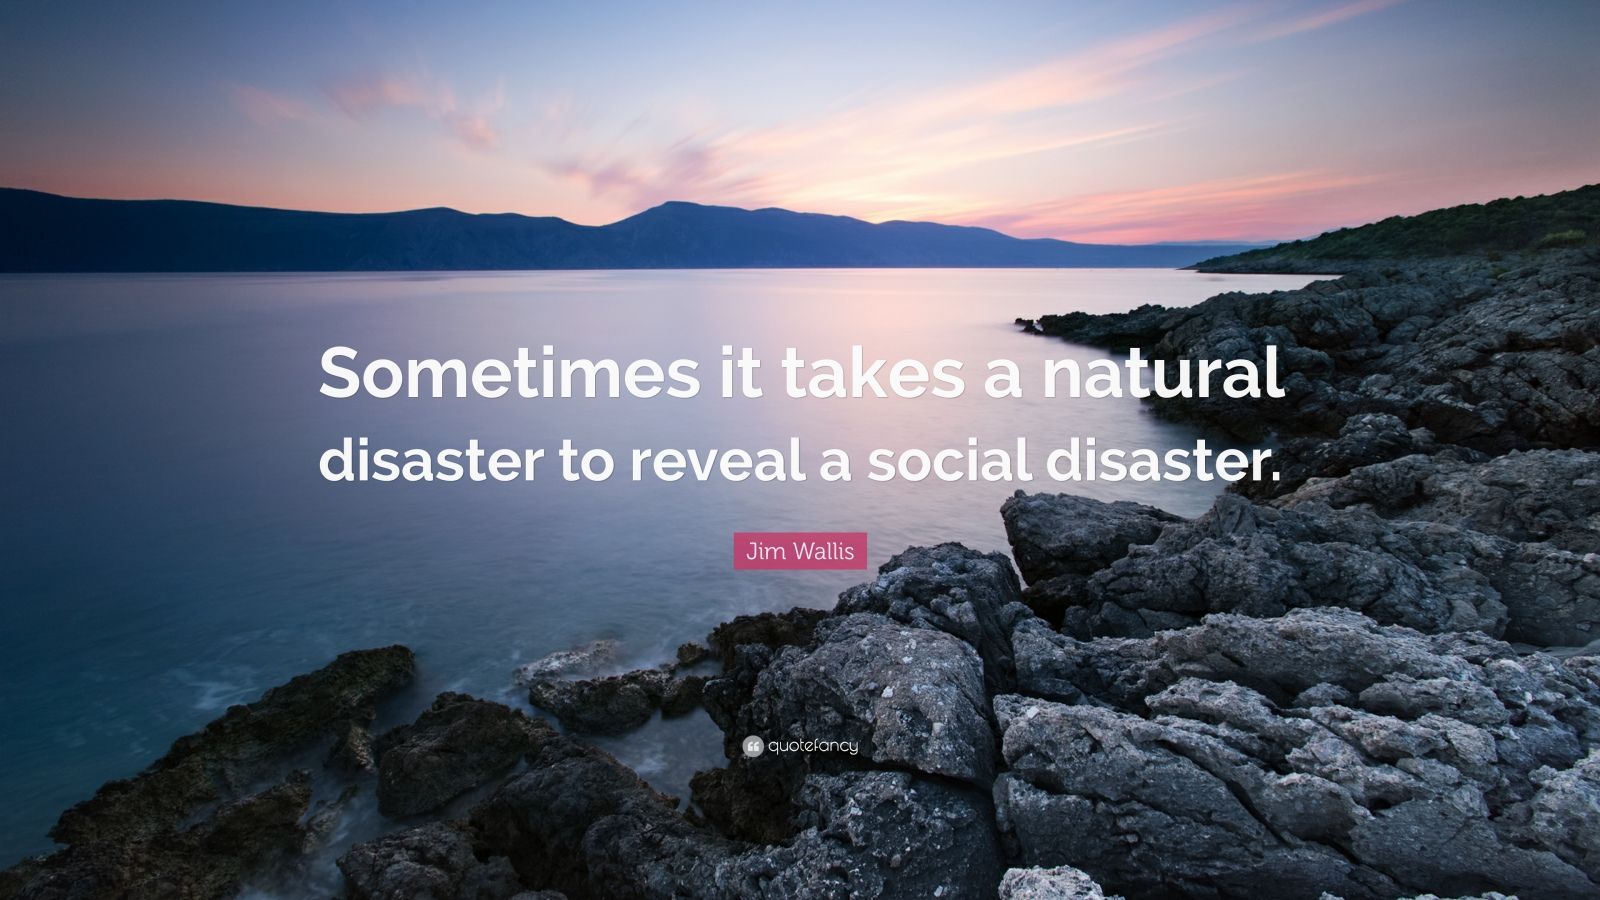 Jim Wallis Quote: “Sometimes it takes a natural disaster to reveal a social disaster.” (7 wallpaper)